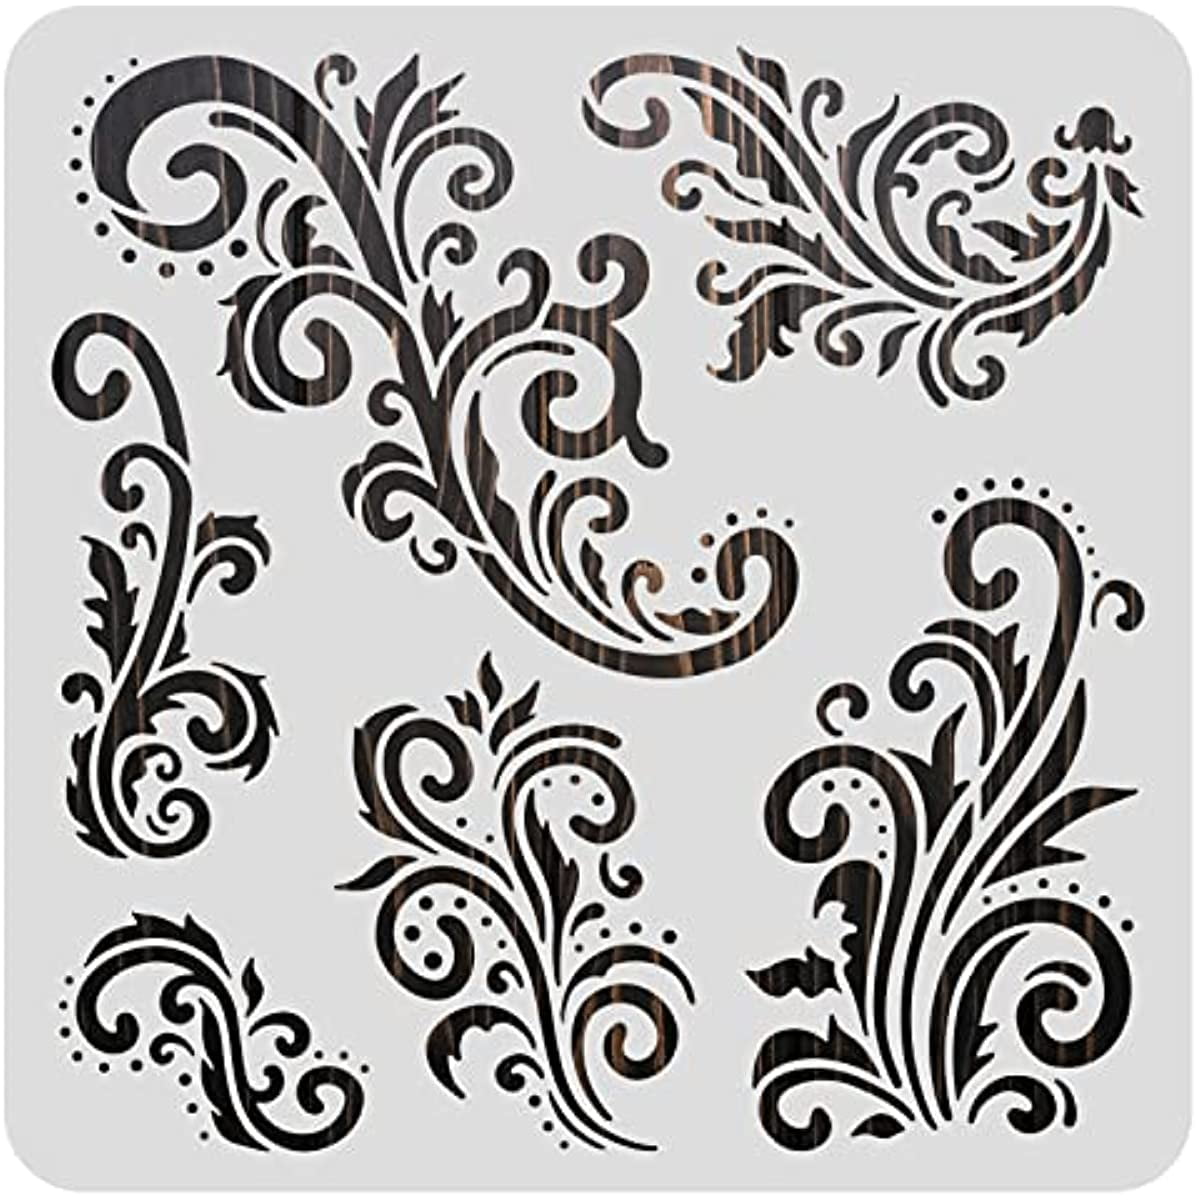 Floral Swirl All Over Pattern Stencil (10 mil Plastic), Decor Stencils for  Painting on Wood, Wall, Tile, Canvas, Paper, Fabric, Furniture and Floor, Reusable Stencil